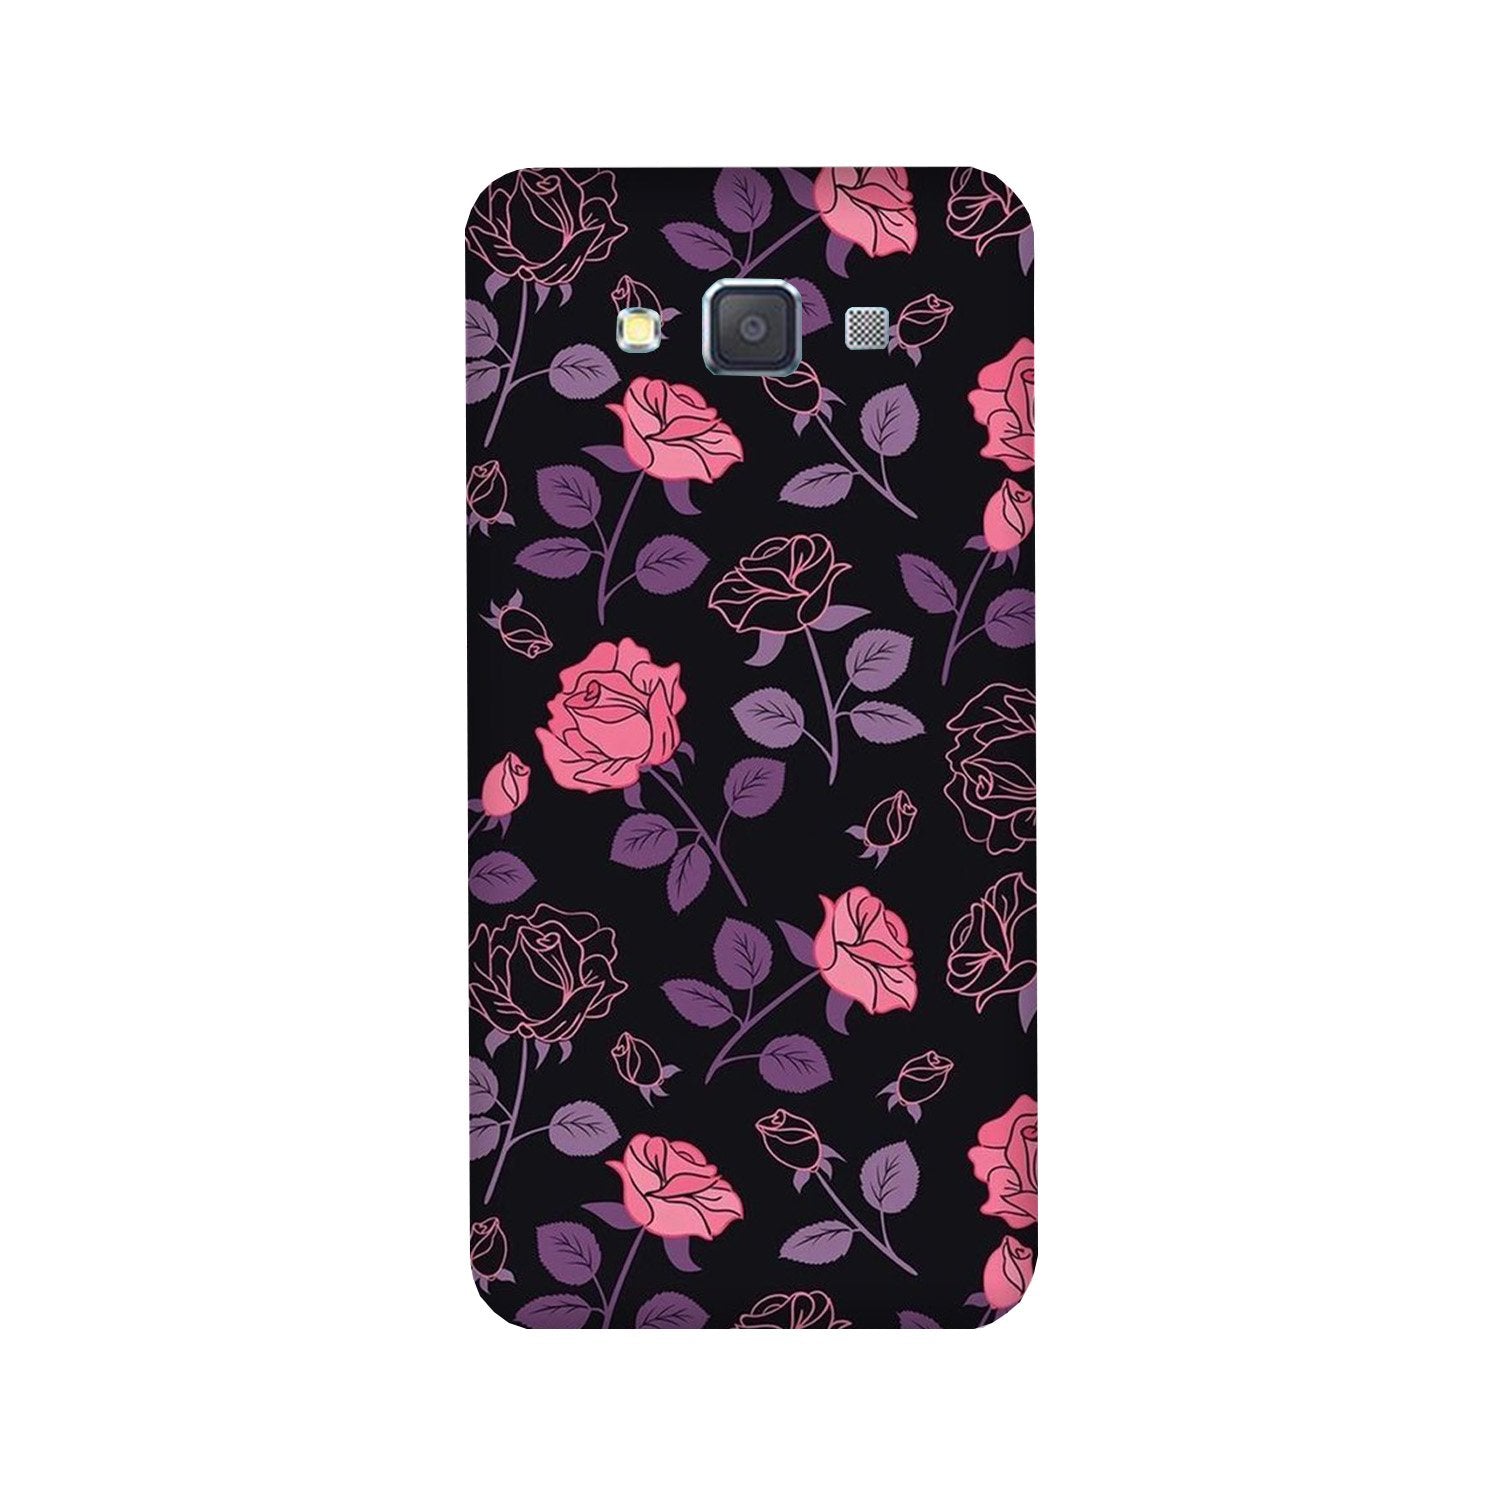 Rose Black Background Case for Galaxy E7